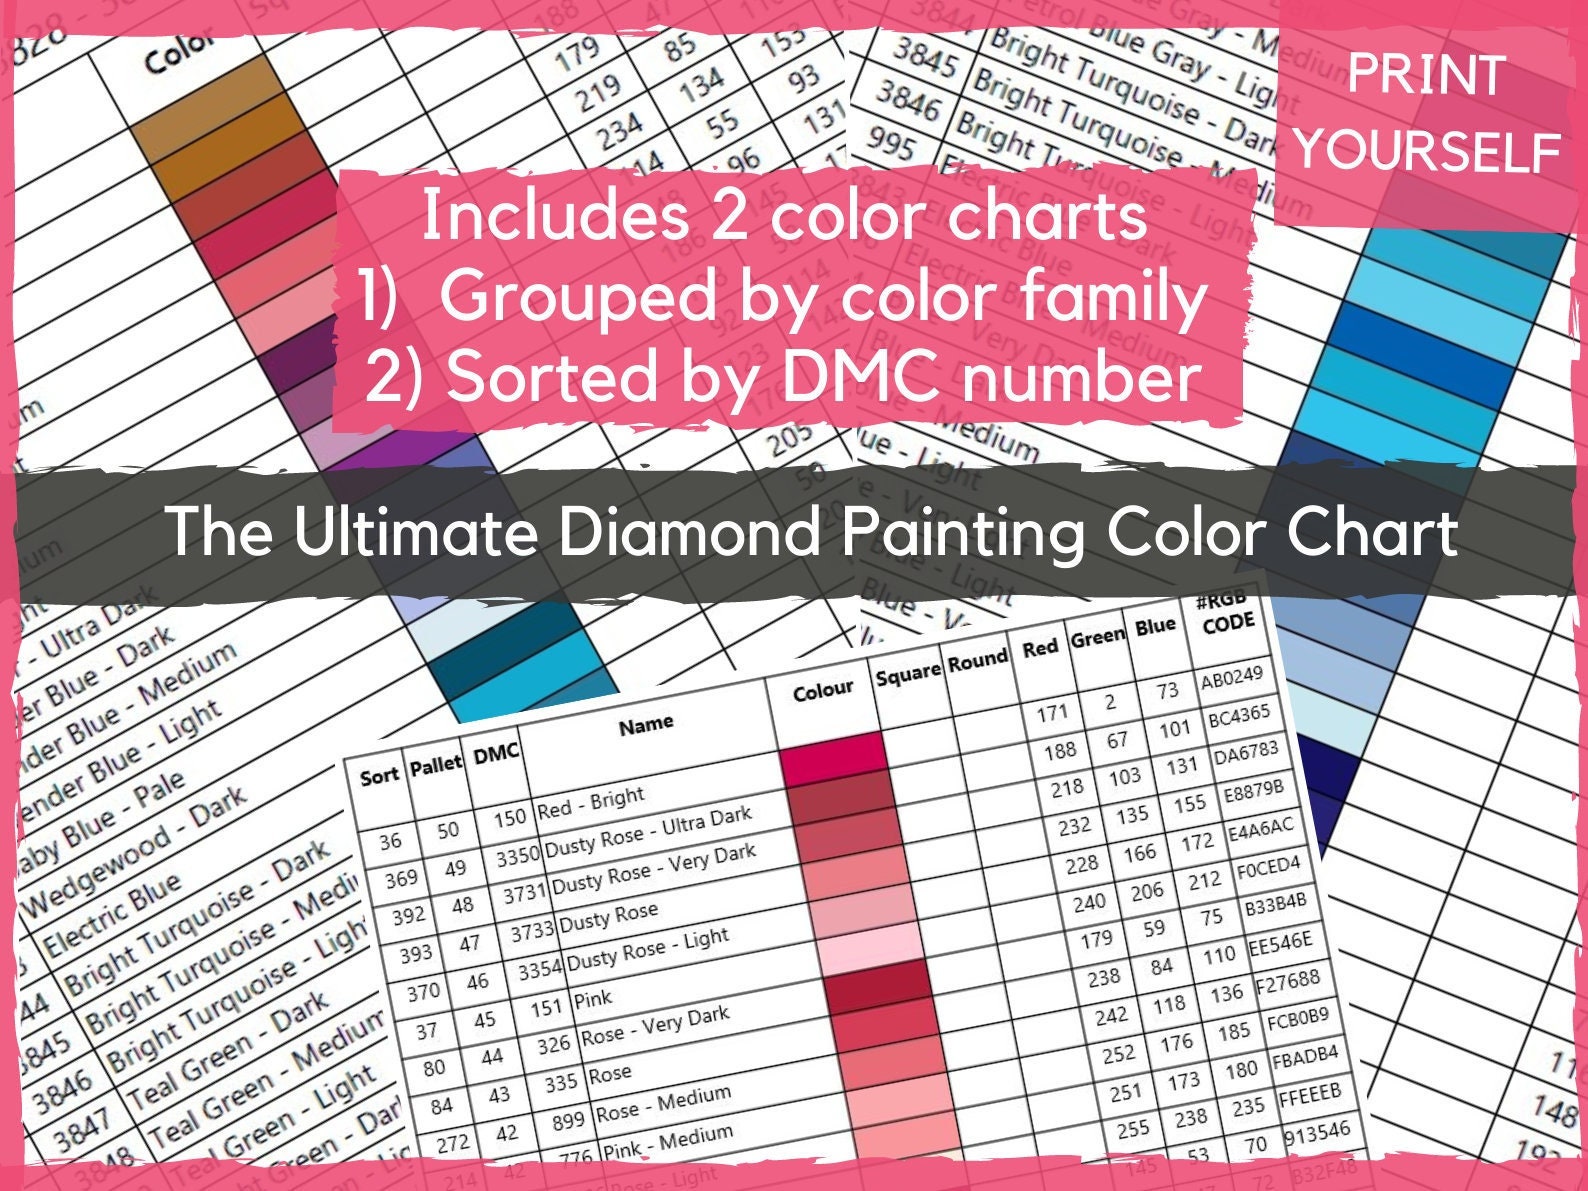 DMC Color Chart Book for Diamond Painting: The Complete Table: 2019 DMC Color Card [Book]